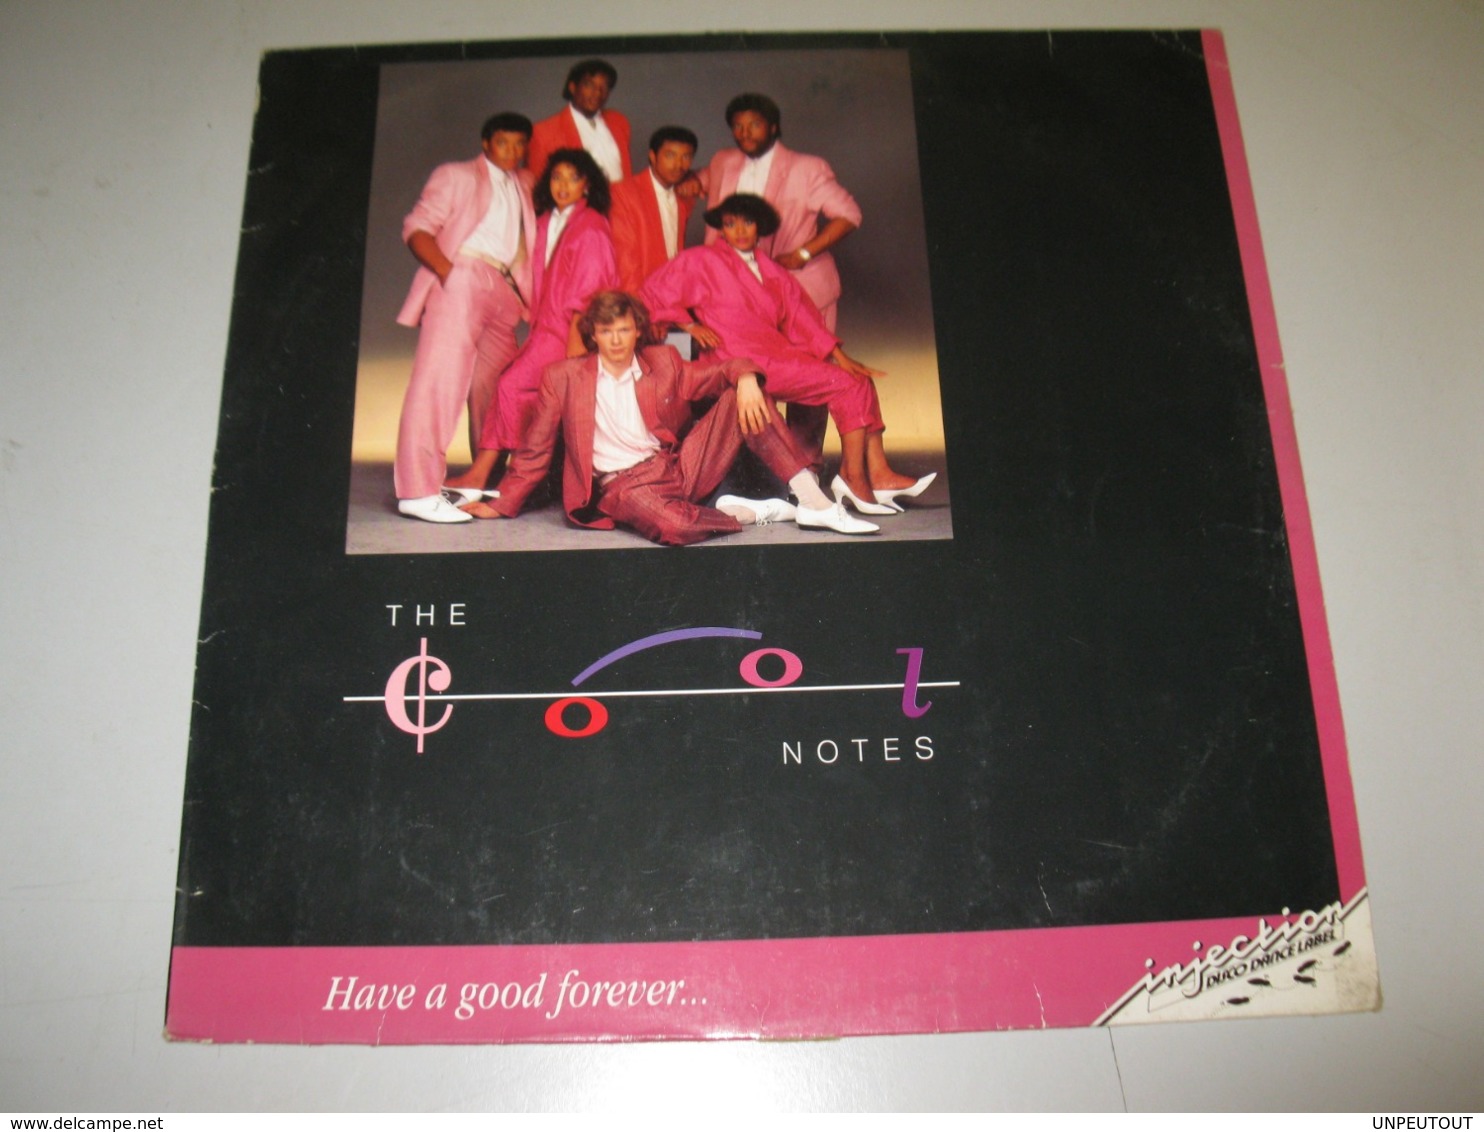 VINYLE THE COOL NOTES "HAVE A GOOD FOREVER" 33 T INJECTION / CNR (1985) - Disco, Pop